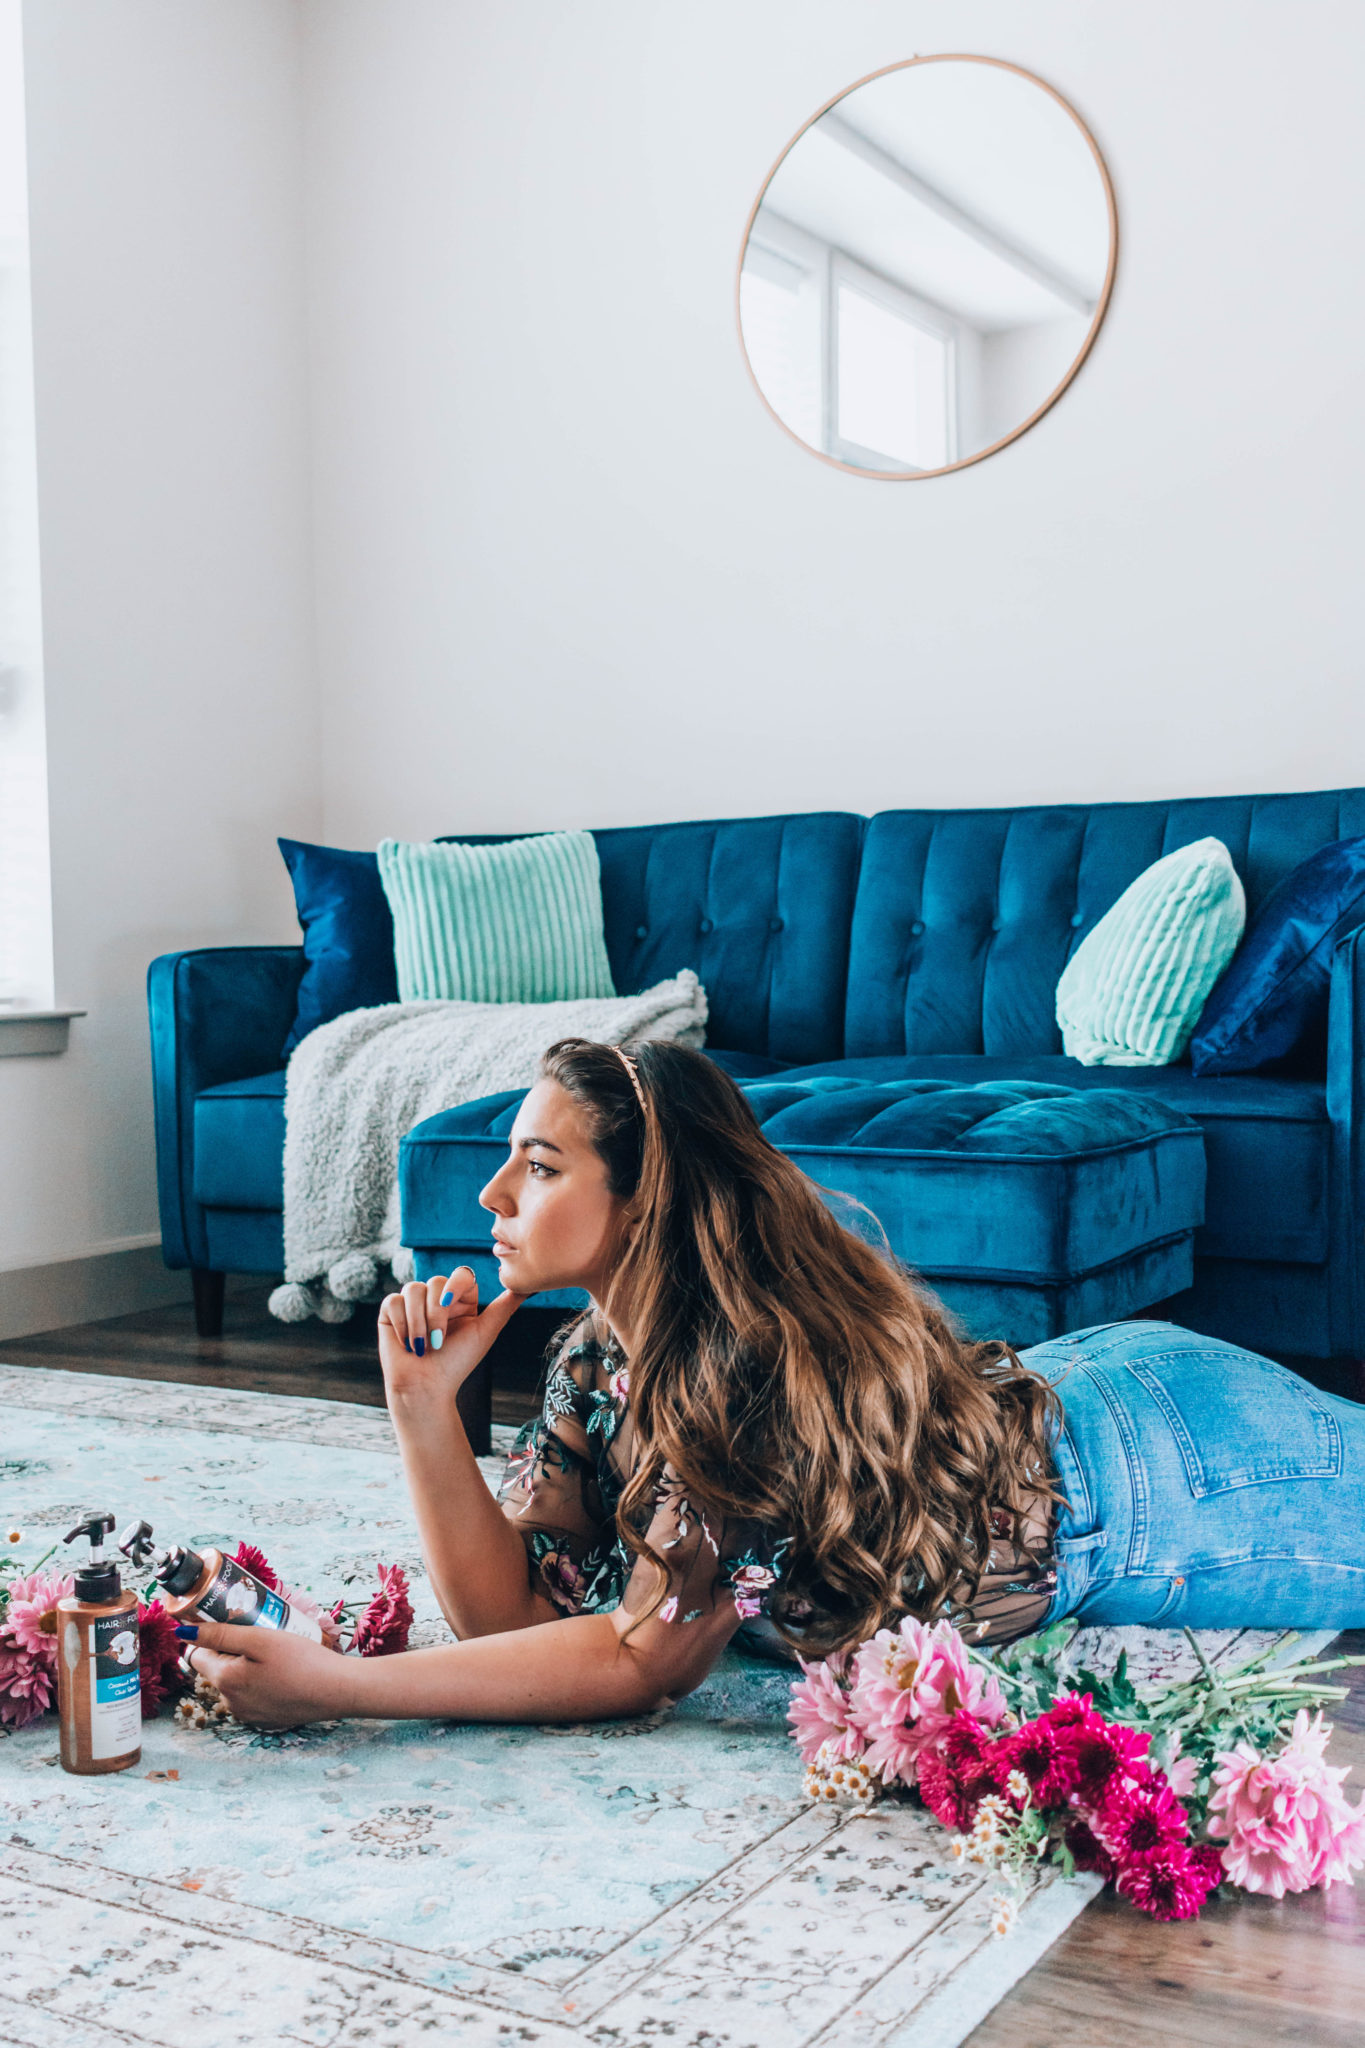 Lauryn Hock sitting on her stomach in the living room surrounded by her blue couch and pink flowers holding Hair Food shampoo and conditioner.